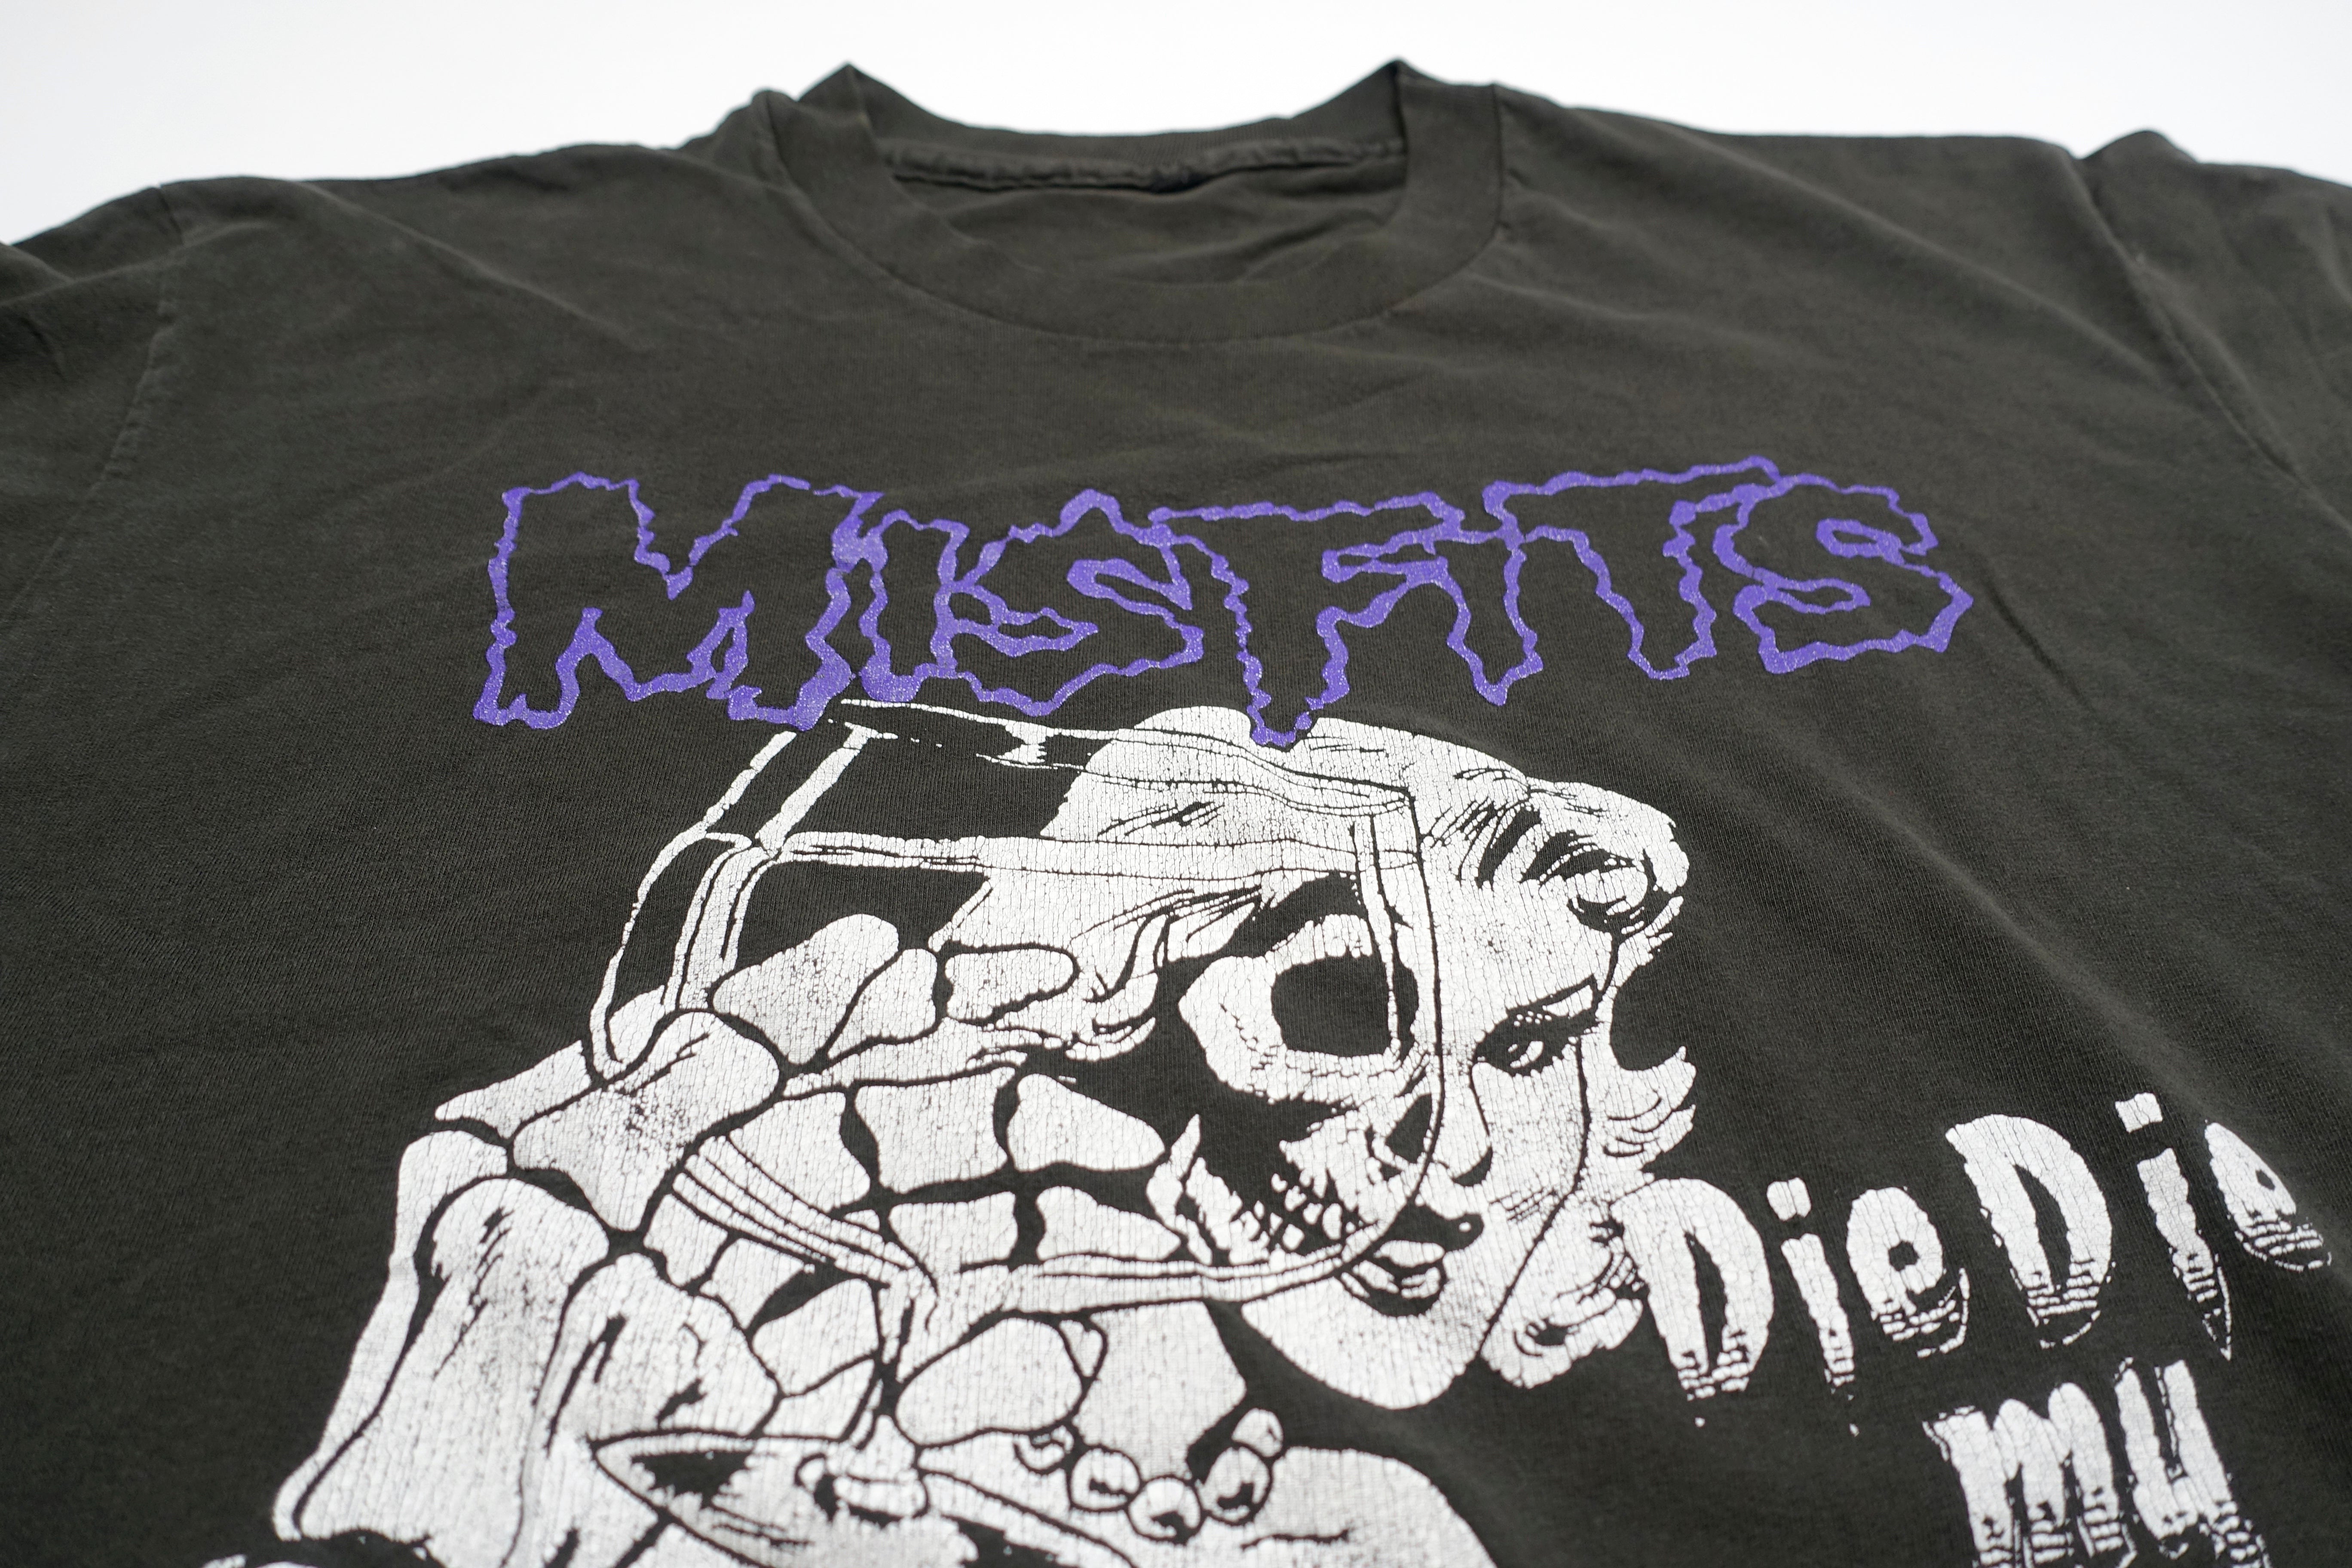 Misfits - Die My Darling / Wolf's Blood 1990 Shirt Size Large